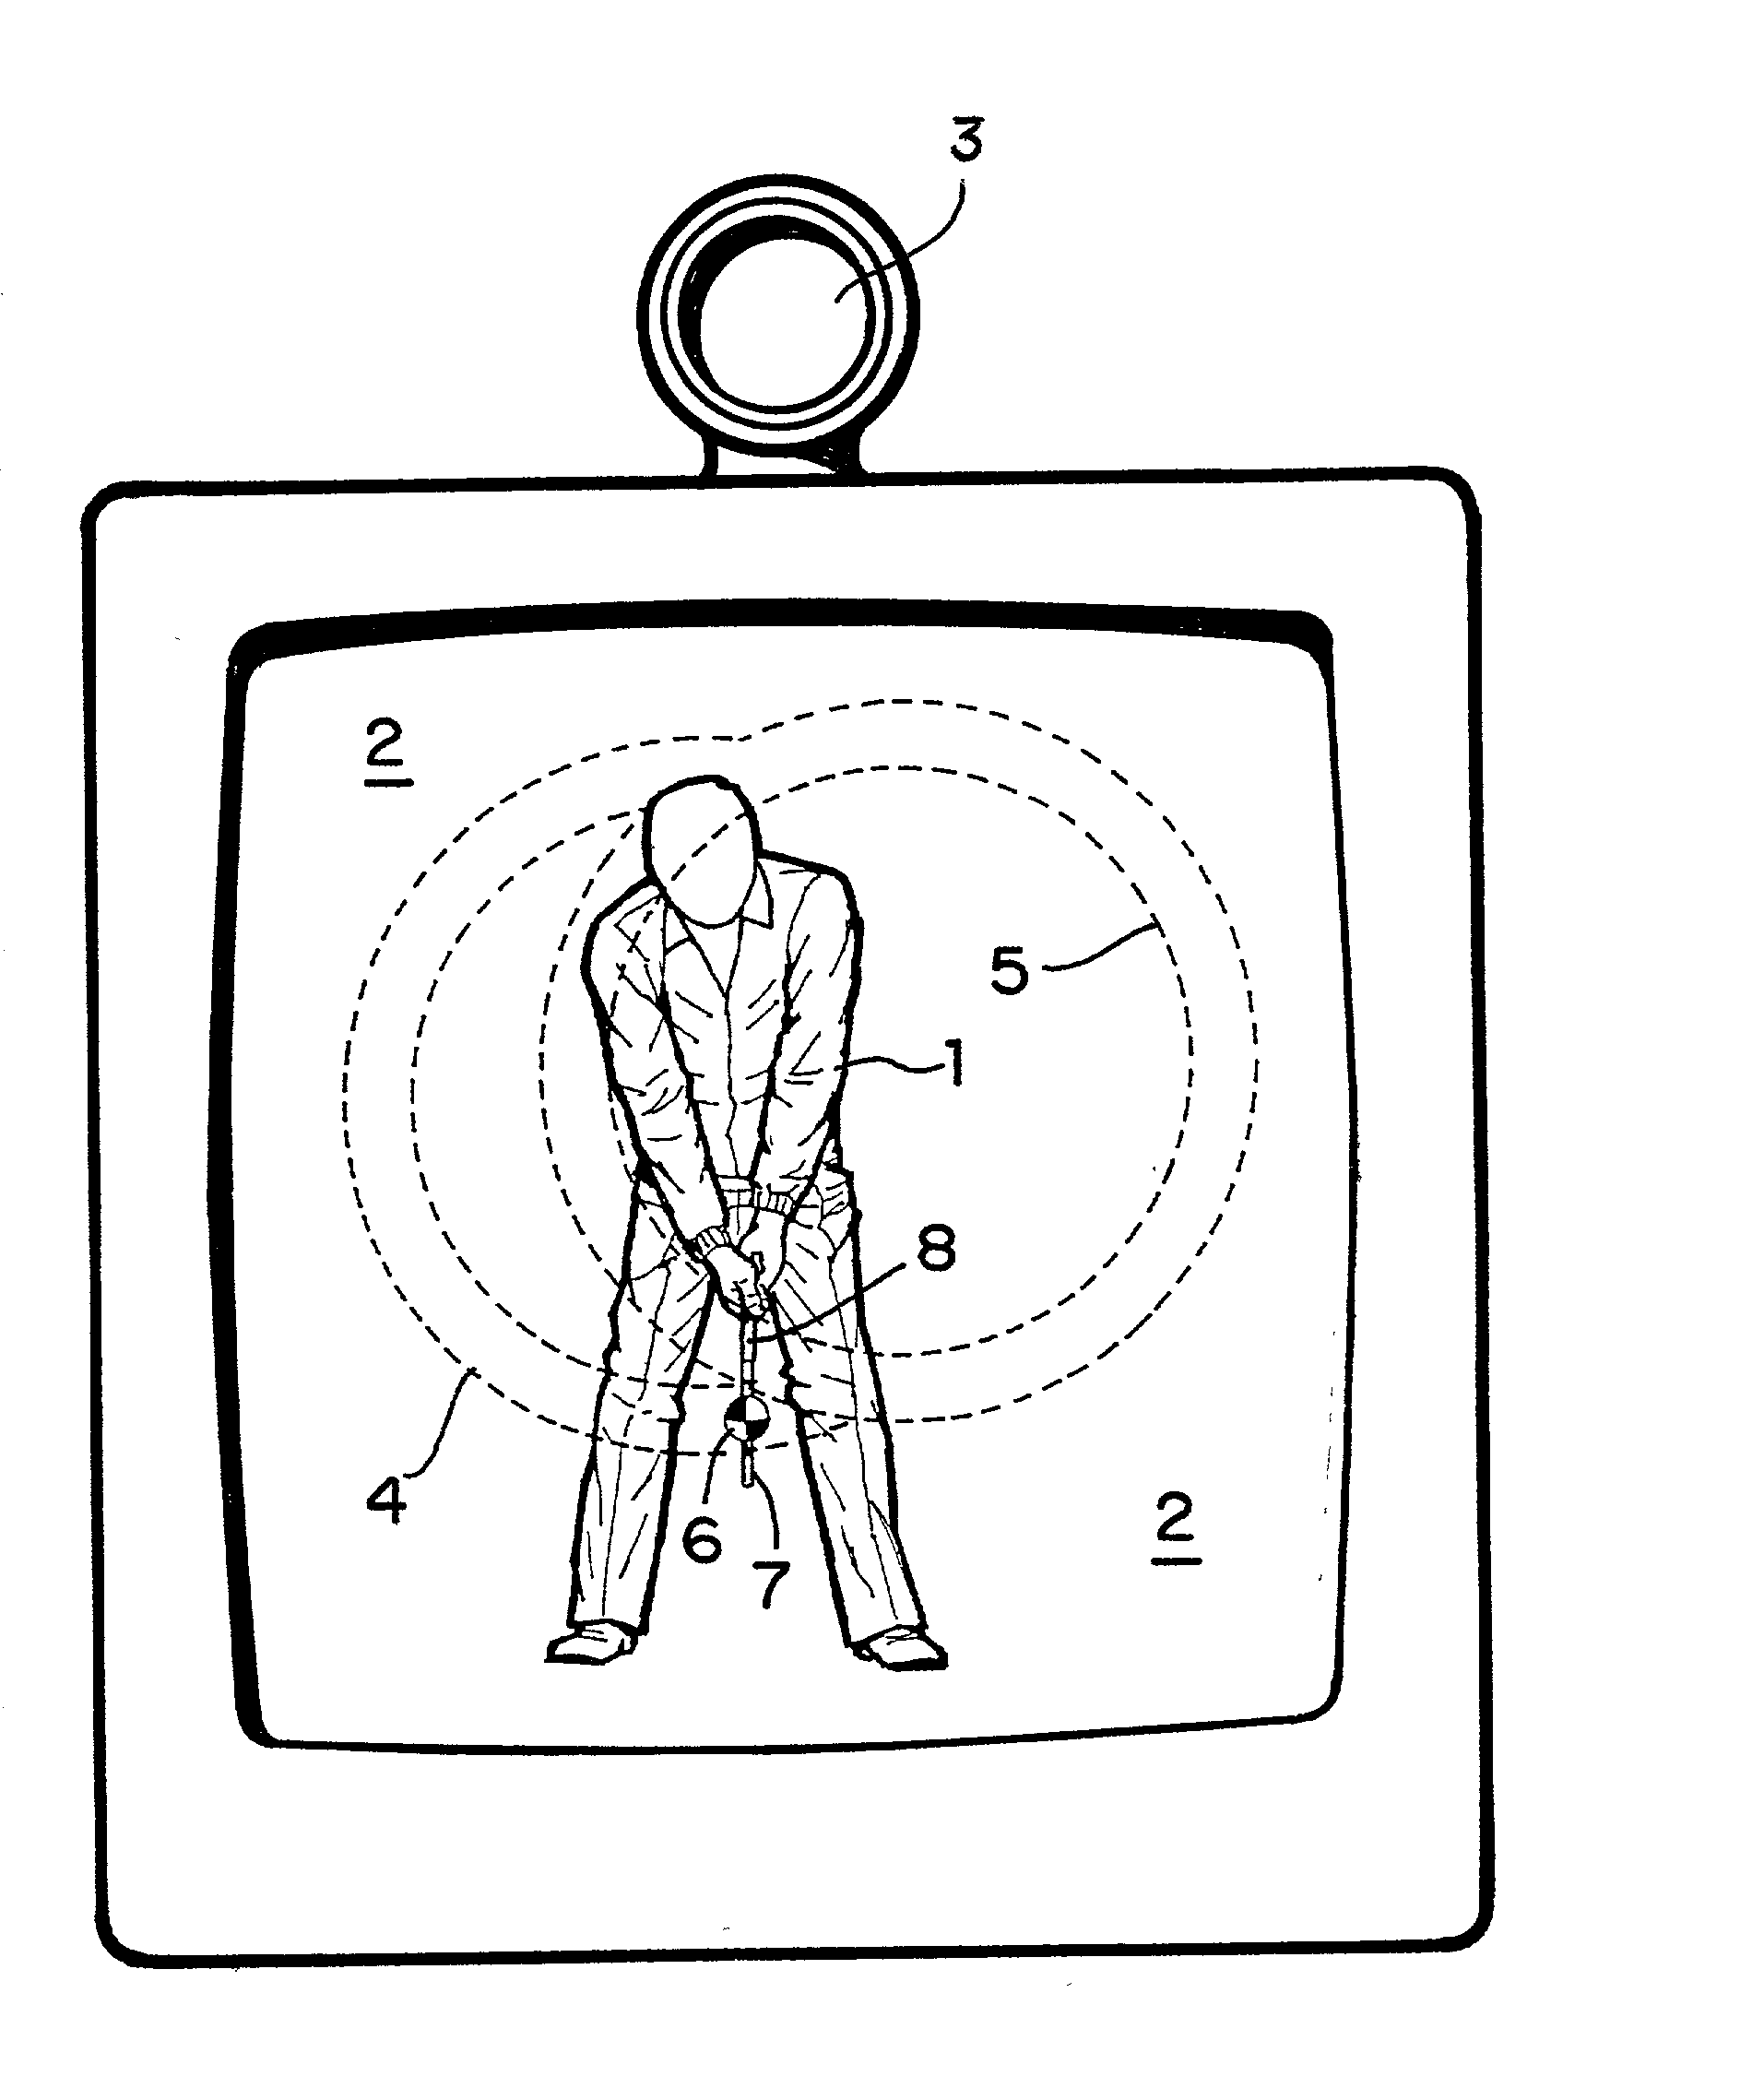 Interactive method and apparatus for tracking and analyzing a golf swing